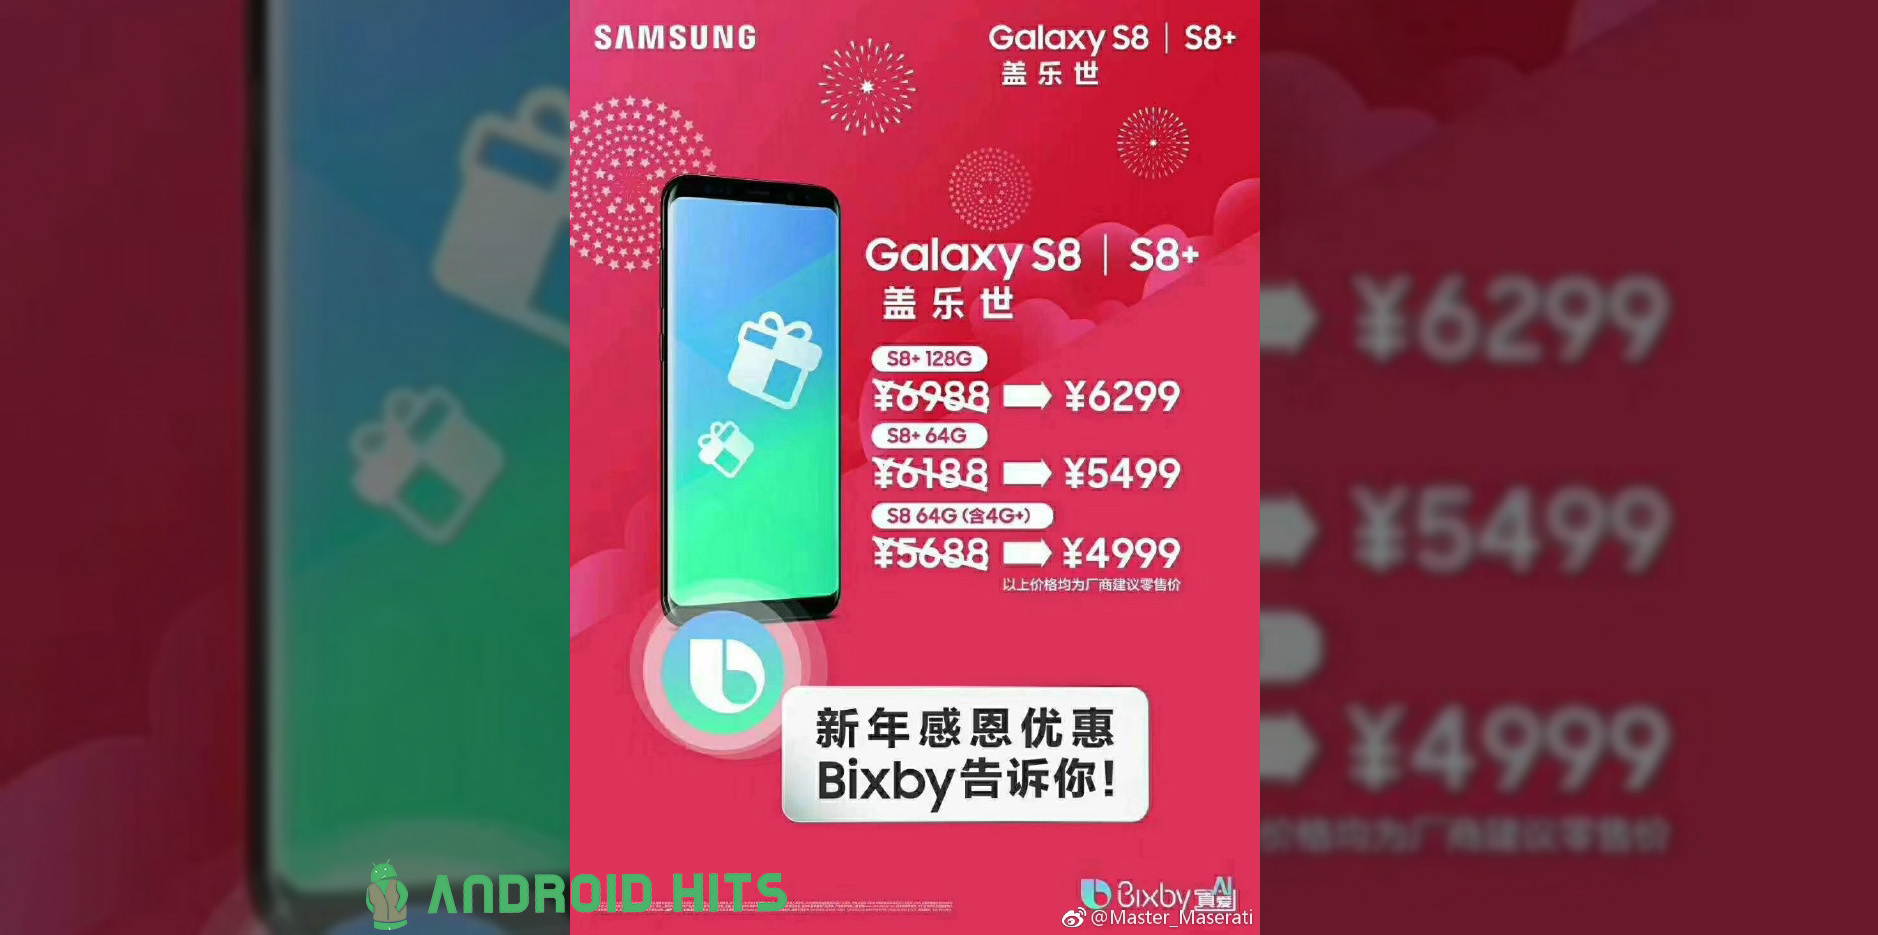 Deal Alert: Samsung Galaxy S8 and S8+ get price slash in China 1